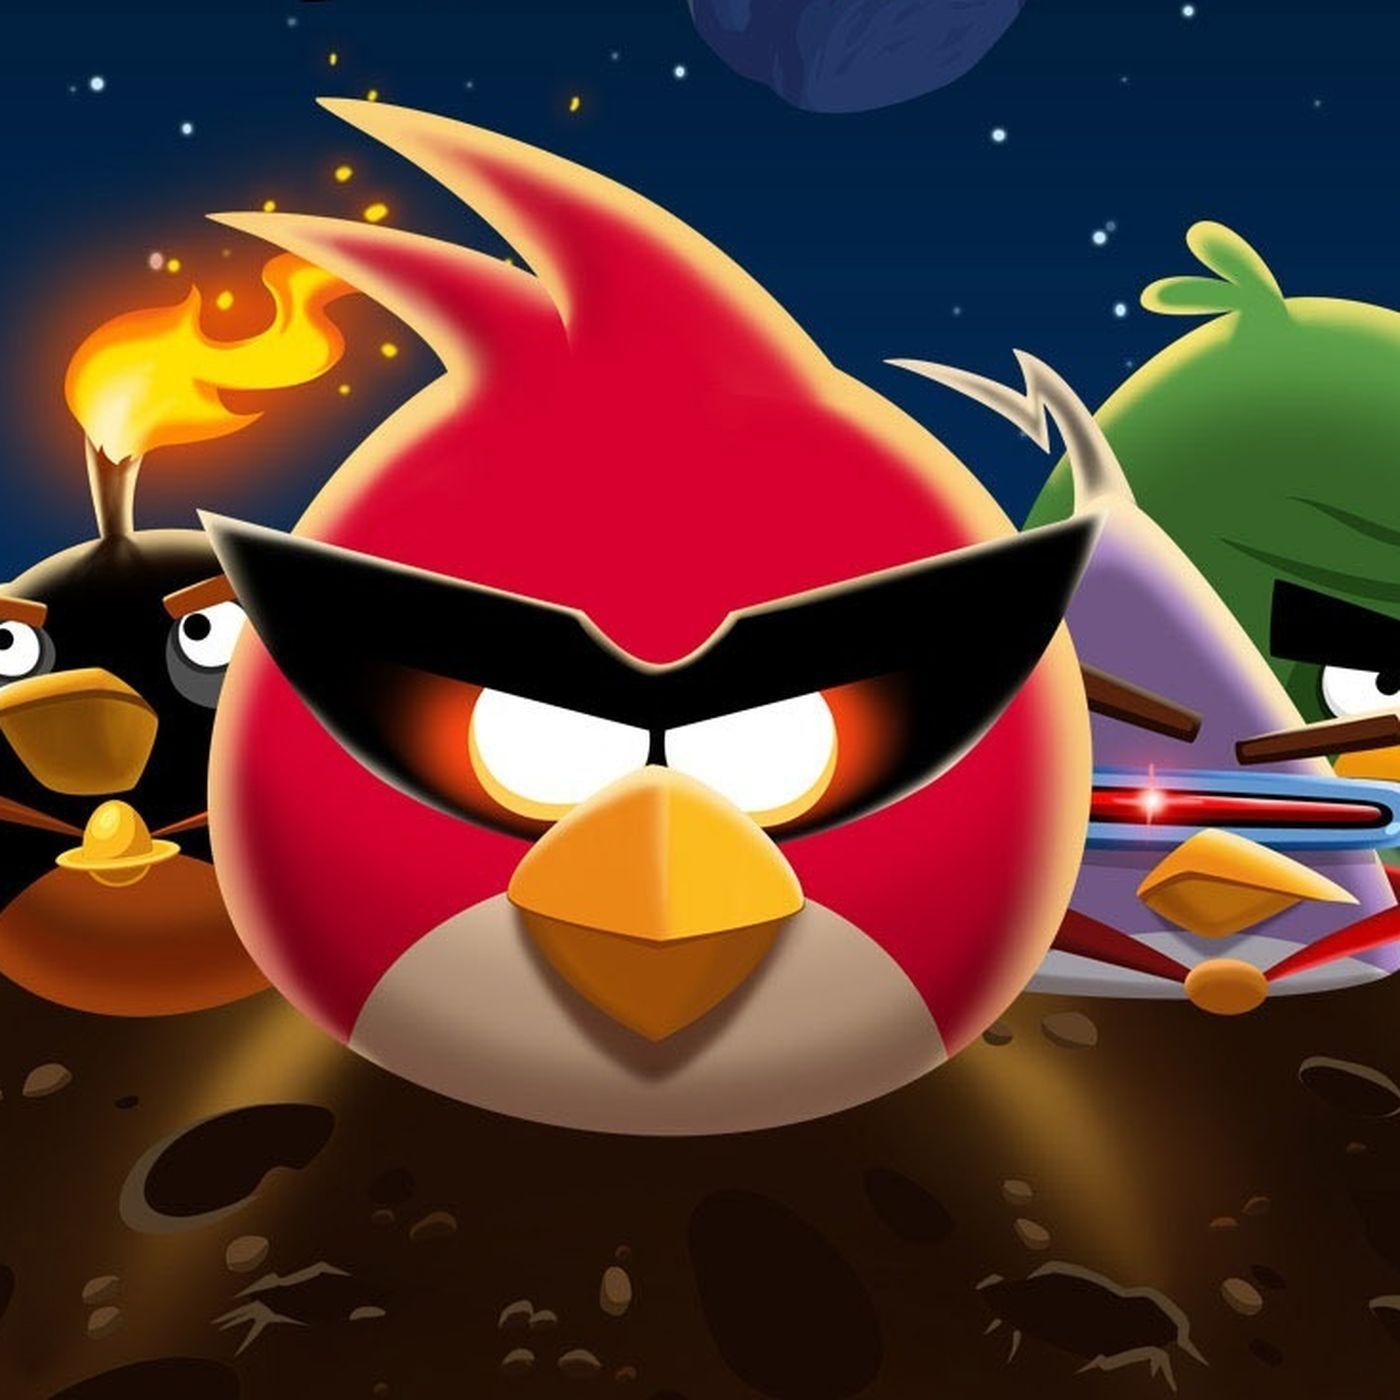 angry birds space hd free